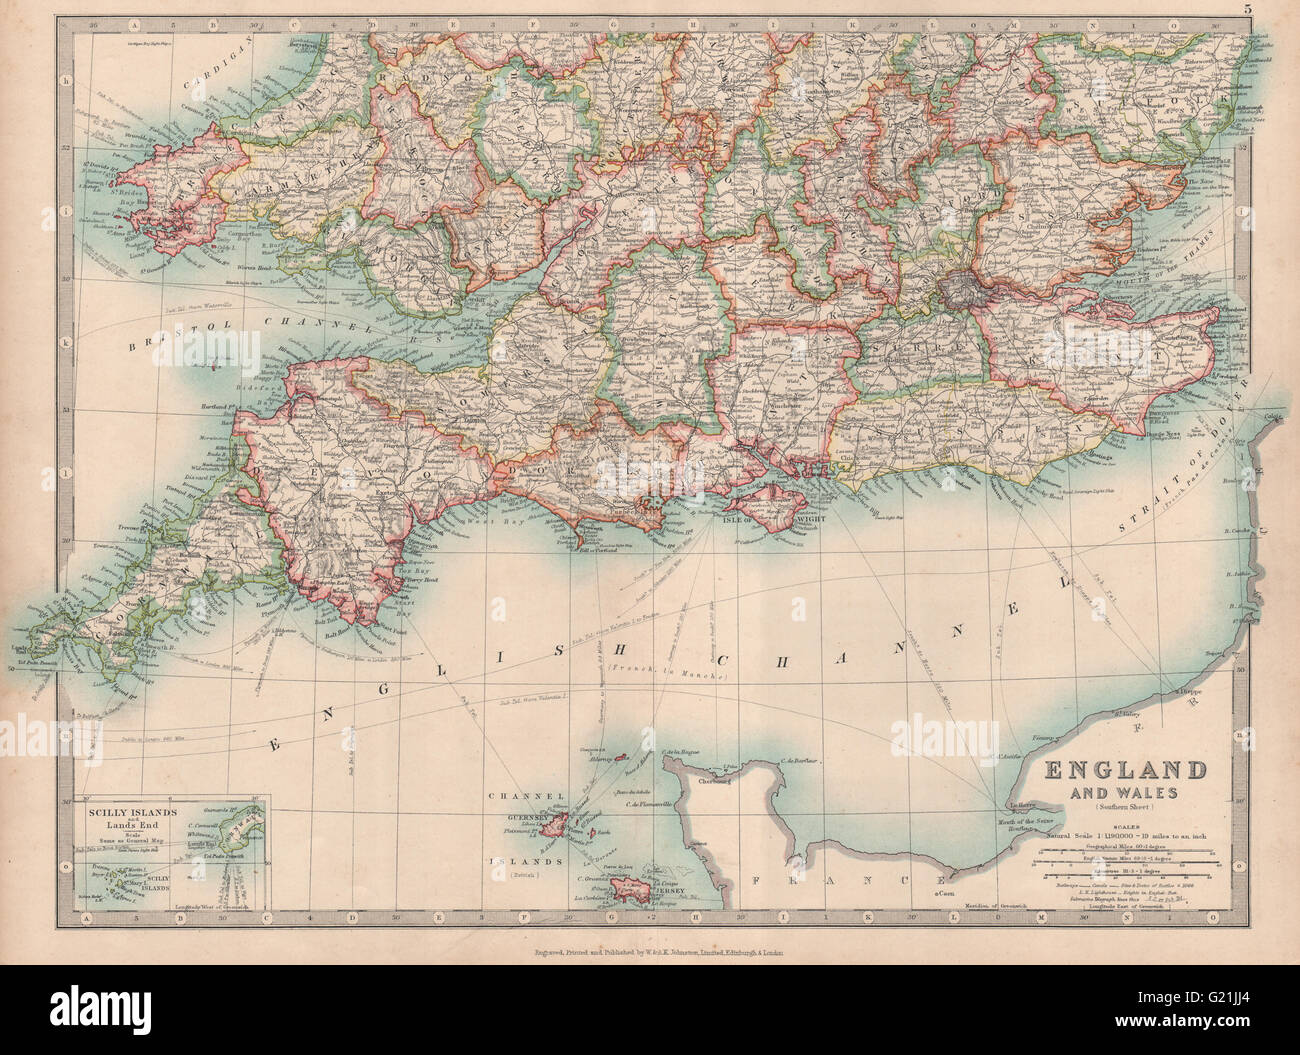 SOUTHERN ENGLAND & WALES. Shows Worcestershire enclaves. JOHNSTON, 1912 map Stock Photo